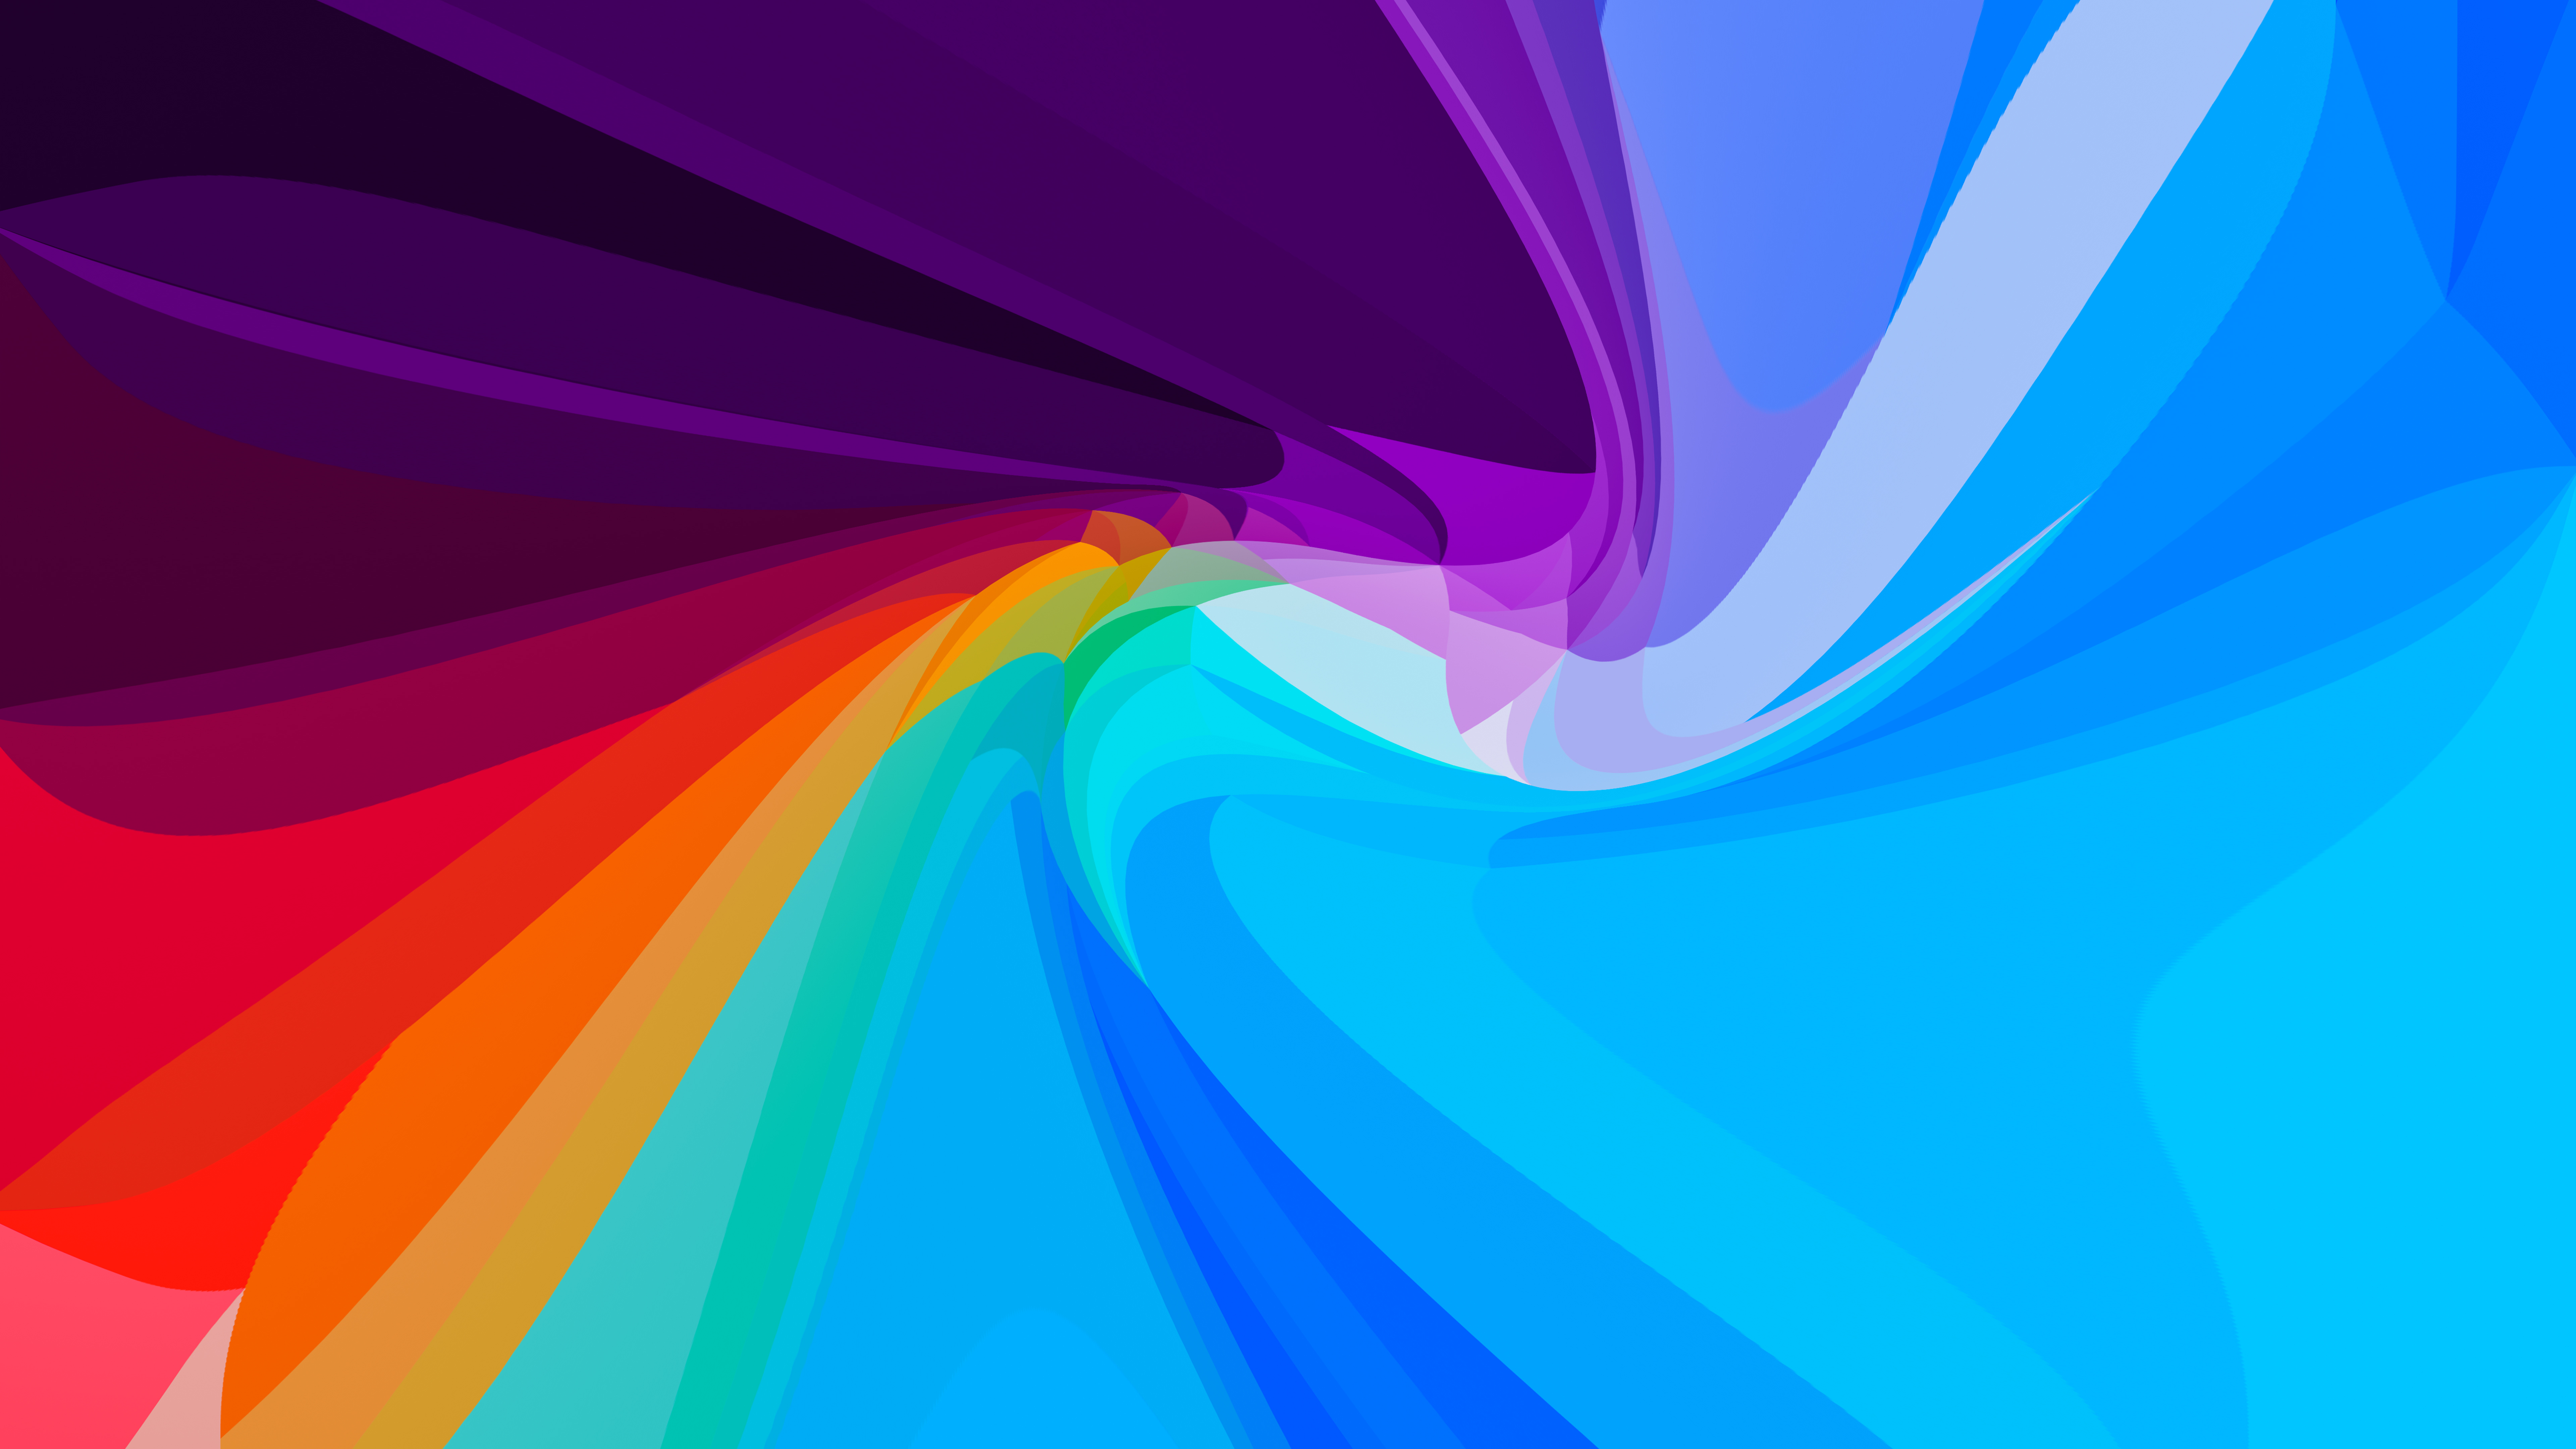 General 7680x4320 abstract colorful digital art